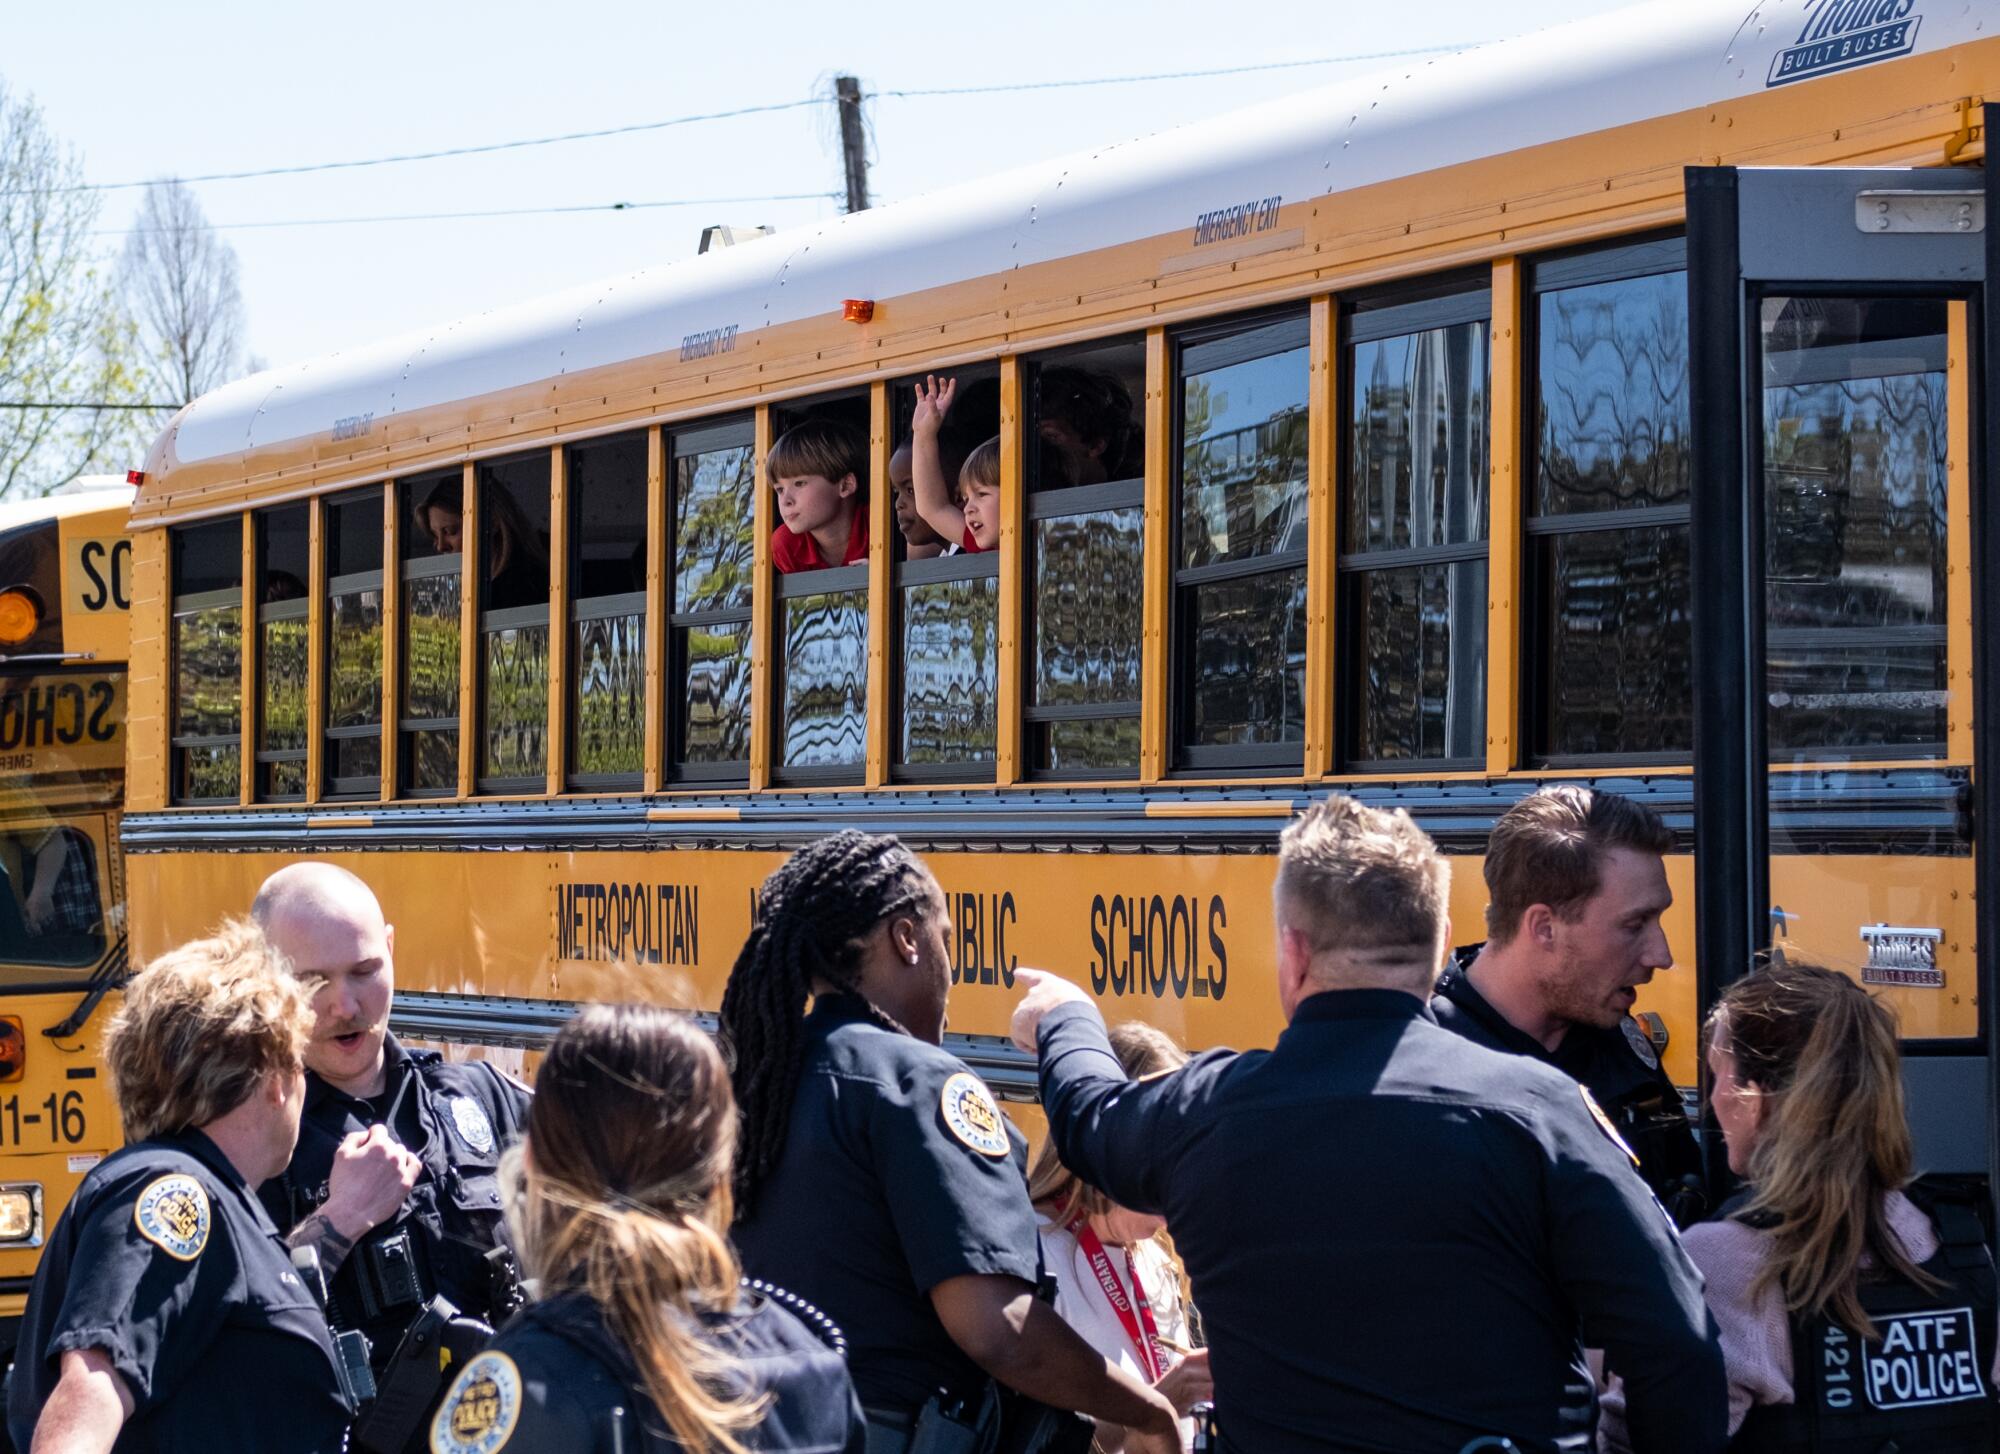 Police officers wait outside a school bus full of children.